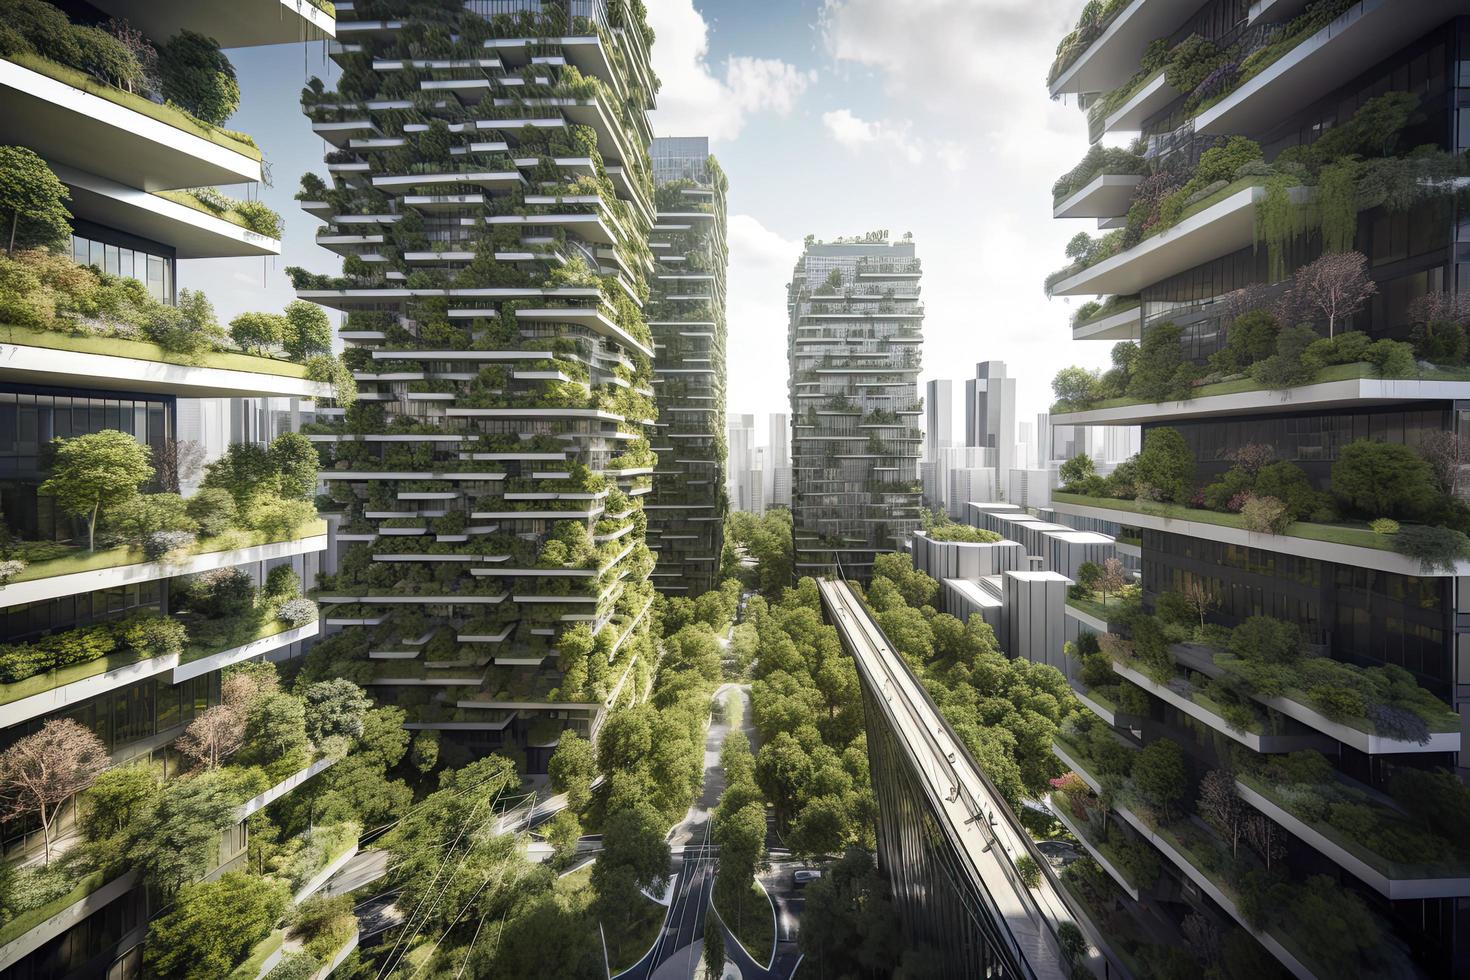 future smart cities, sustainable citys, sustainble highrises with lush planting photo